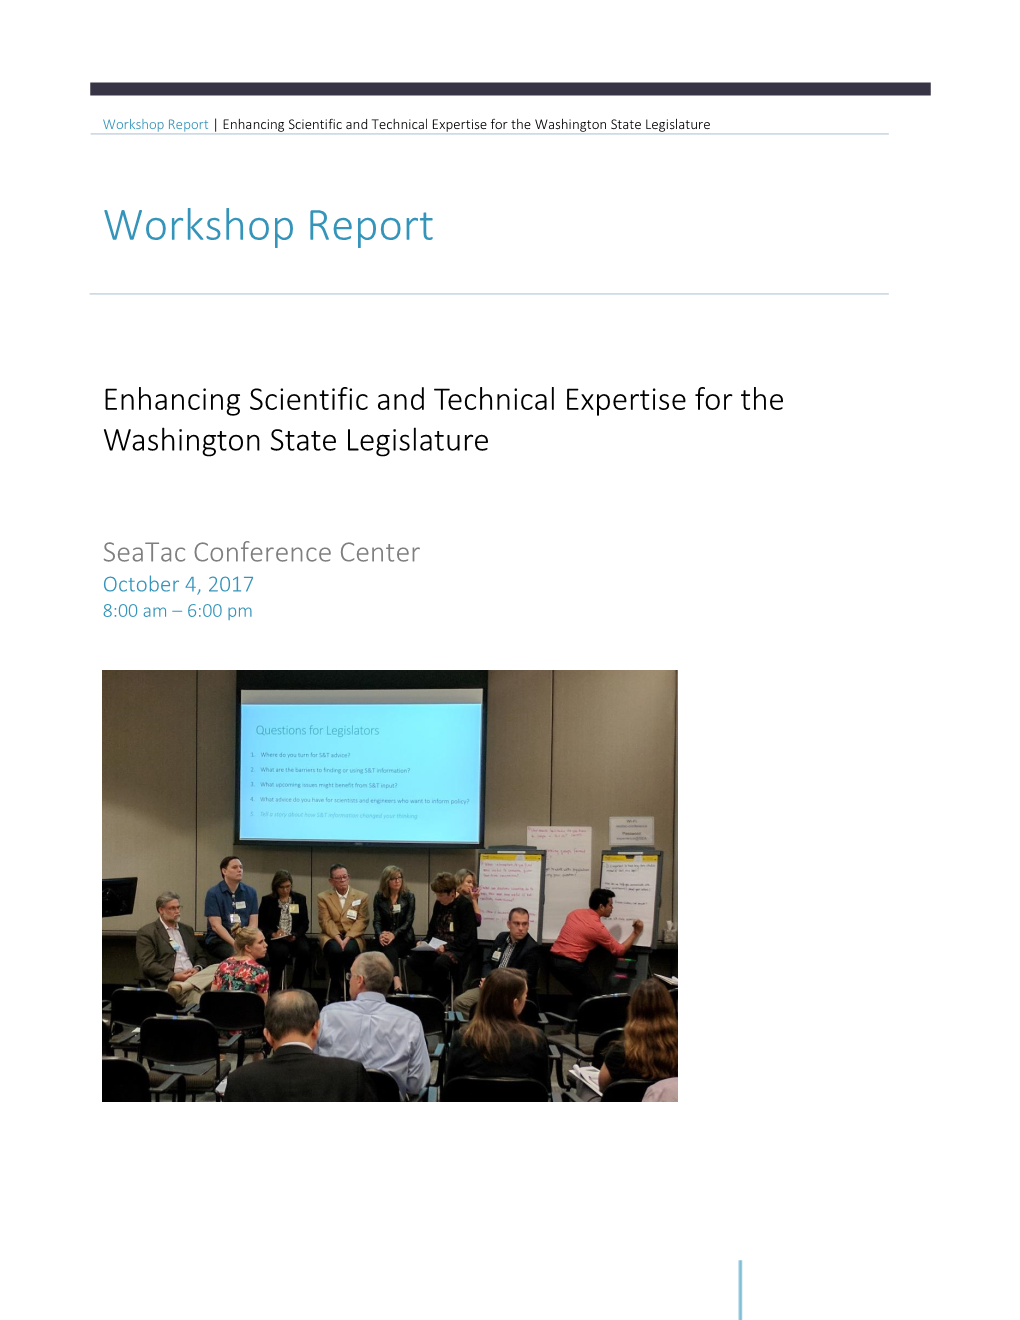 Enhancing Scientific and Technical Expertise for the Washington State Legislature